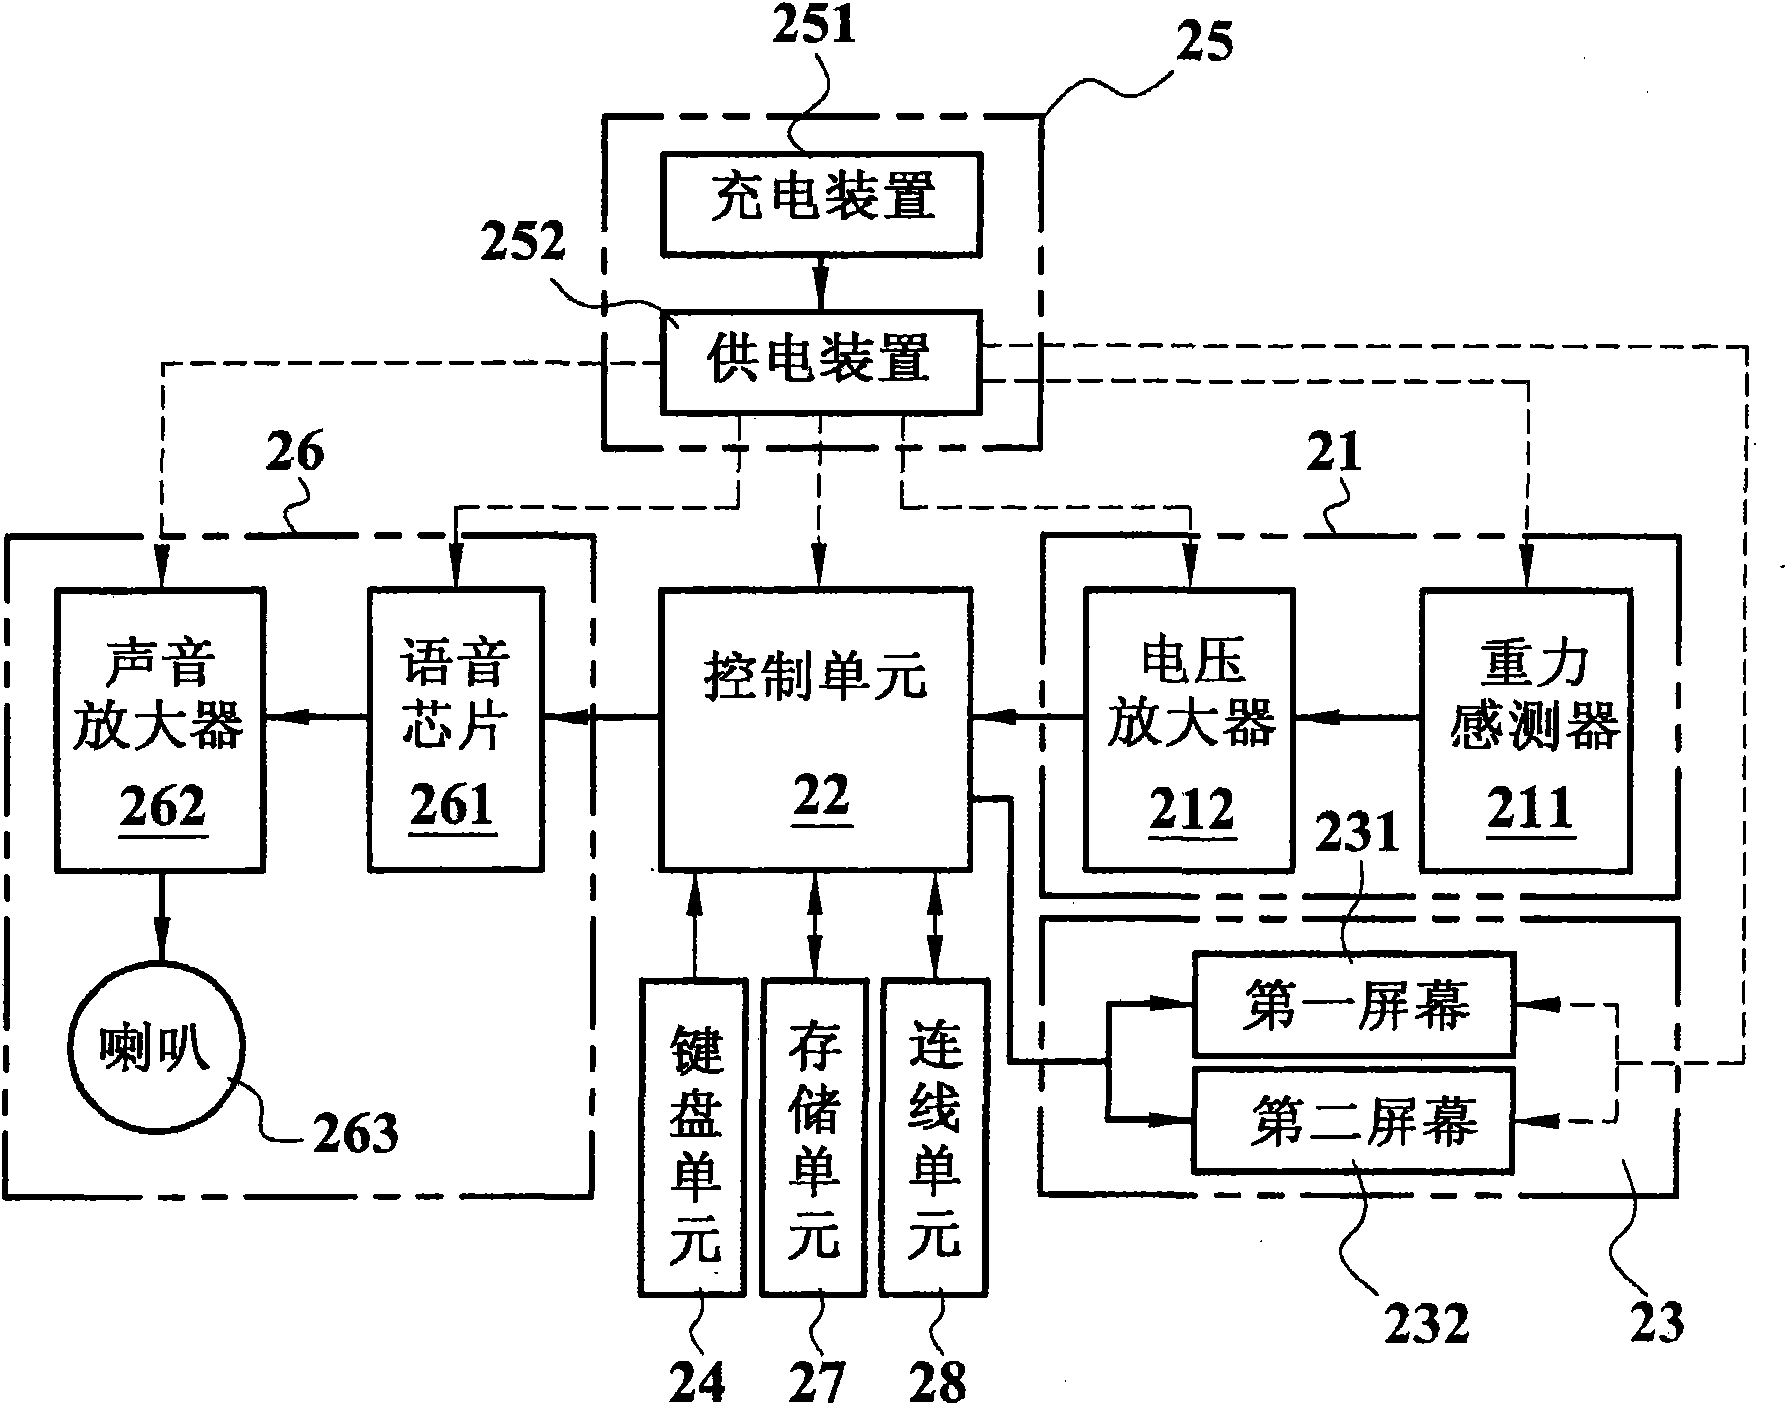 Voice type object flow management auxiliary system